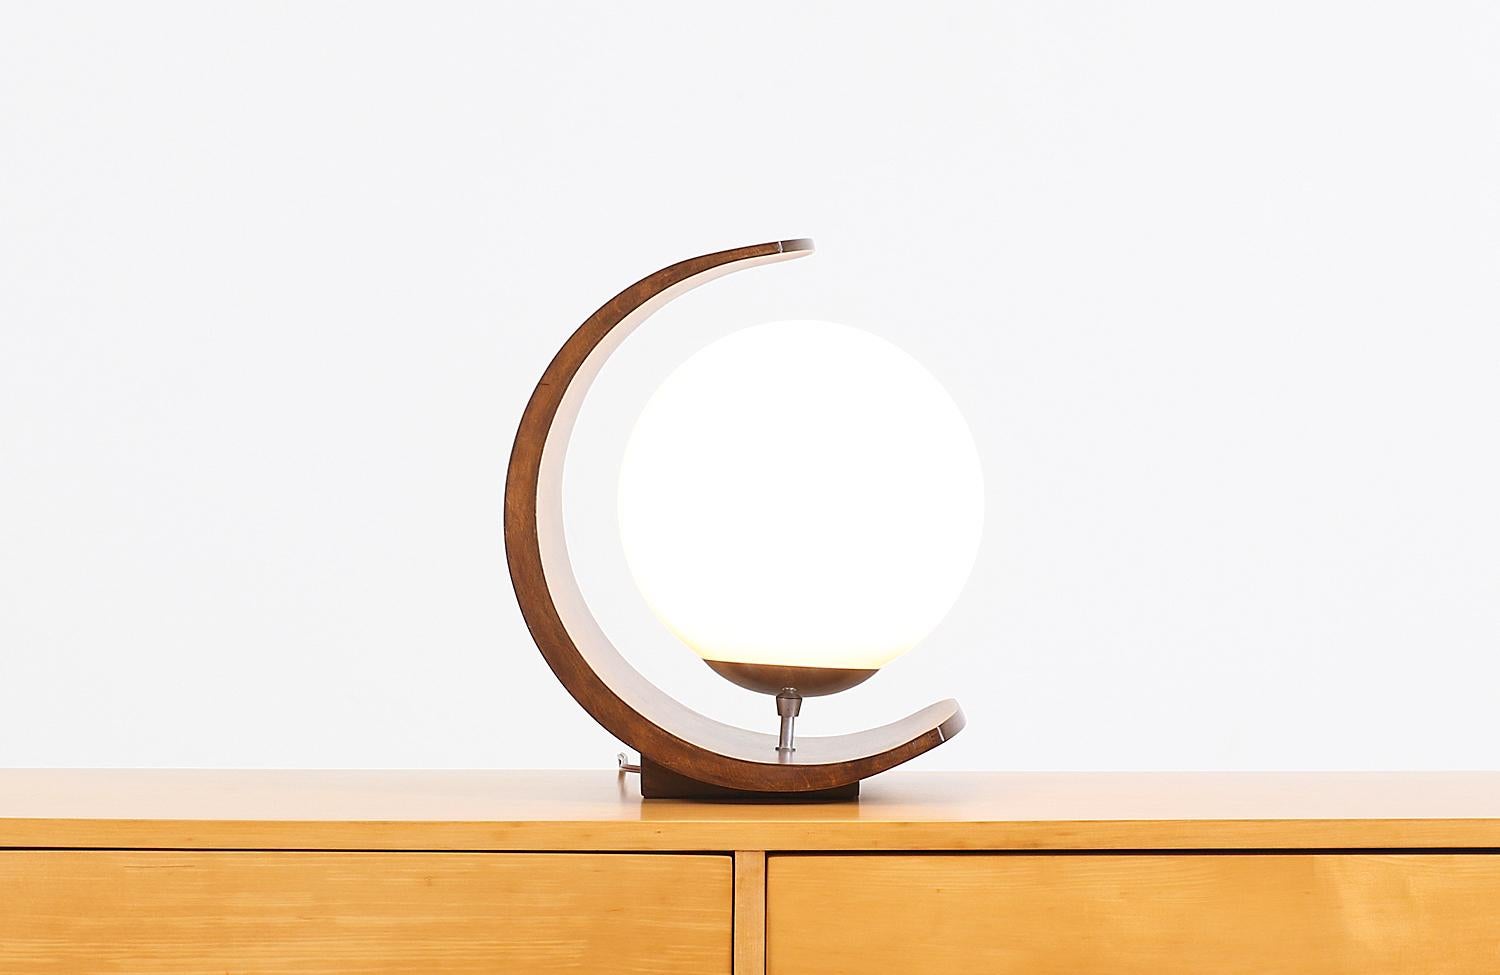 Dazzling modern table lamp designed by Arthur Jacobs for Modeline of California in the United States, circa 1960s. This beautiful table lamp features a quality crafted rounded walnut wood frame with a sculptural half-moon shape creating a luxurious